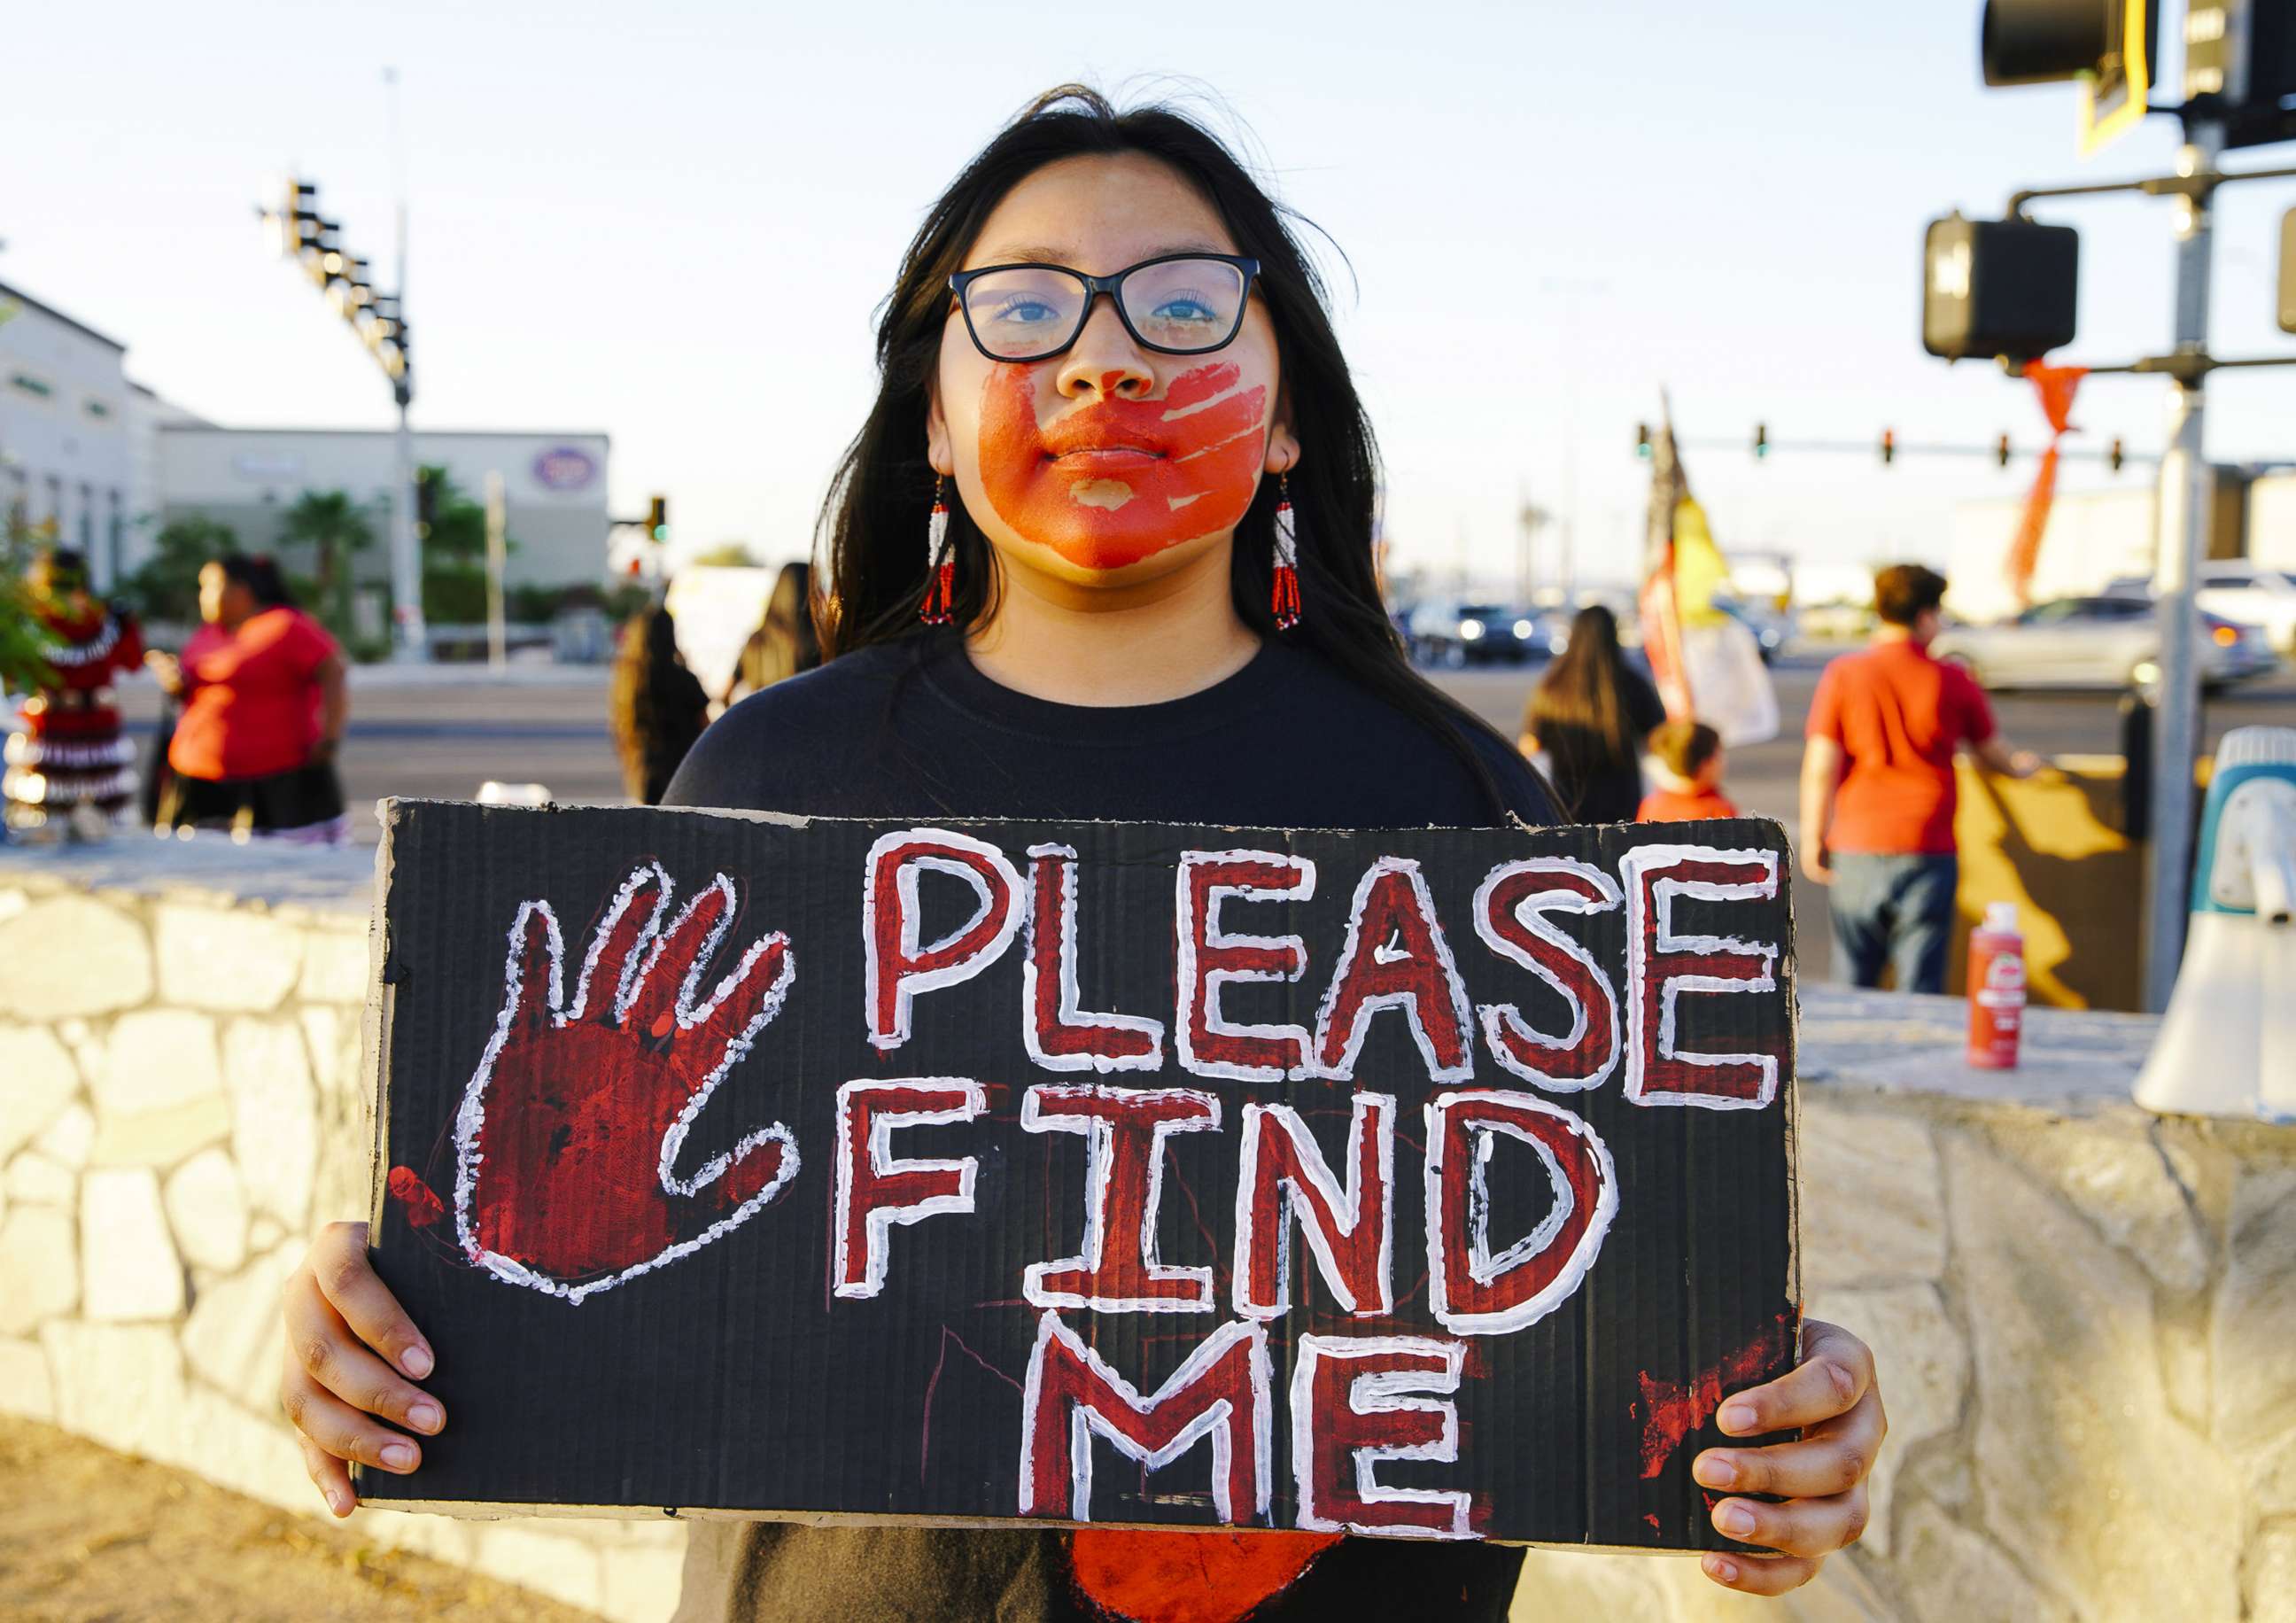 PHOTO: Members of several indigenous nations and community activists protest and bring awareness to the innattention to the high number of indigenous women who are murdered and missing, near Yuma, Ariz., May 6, 2022.